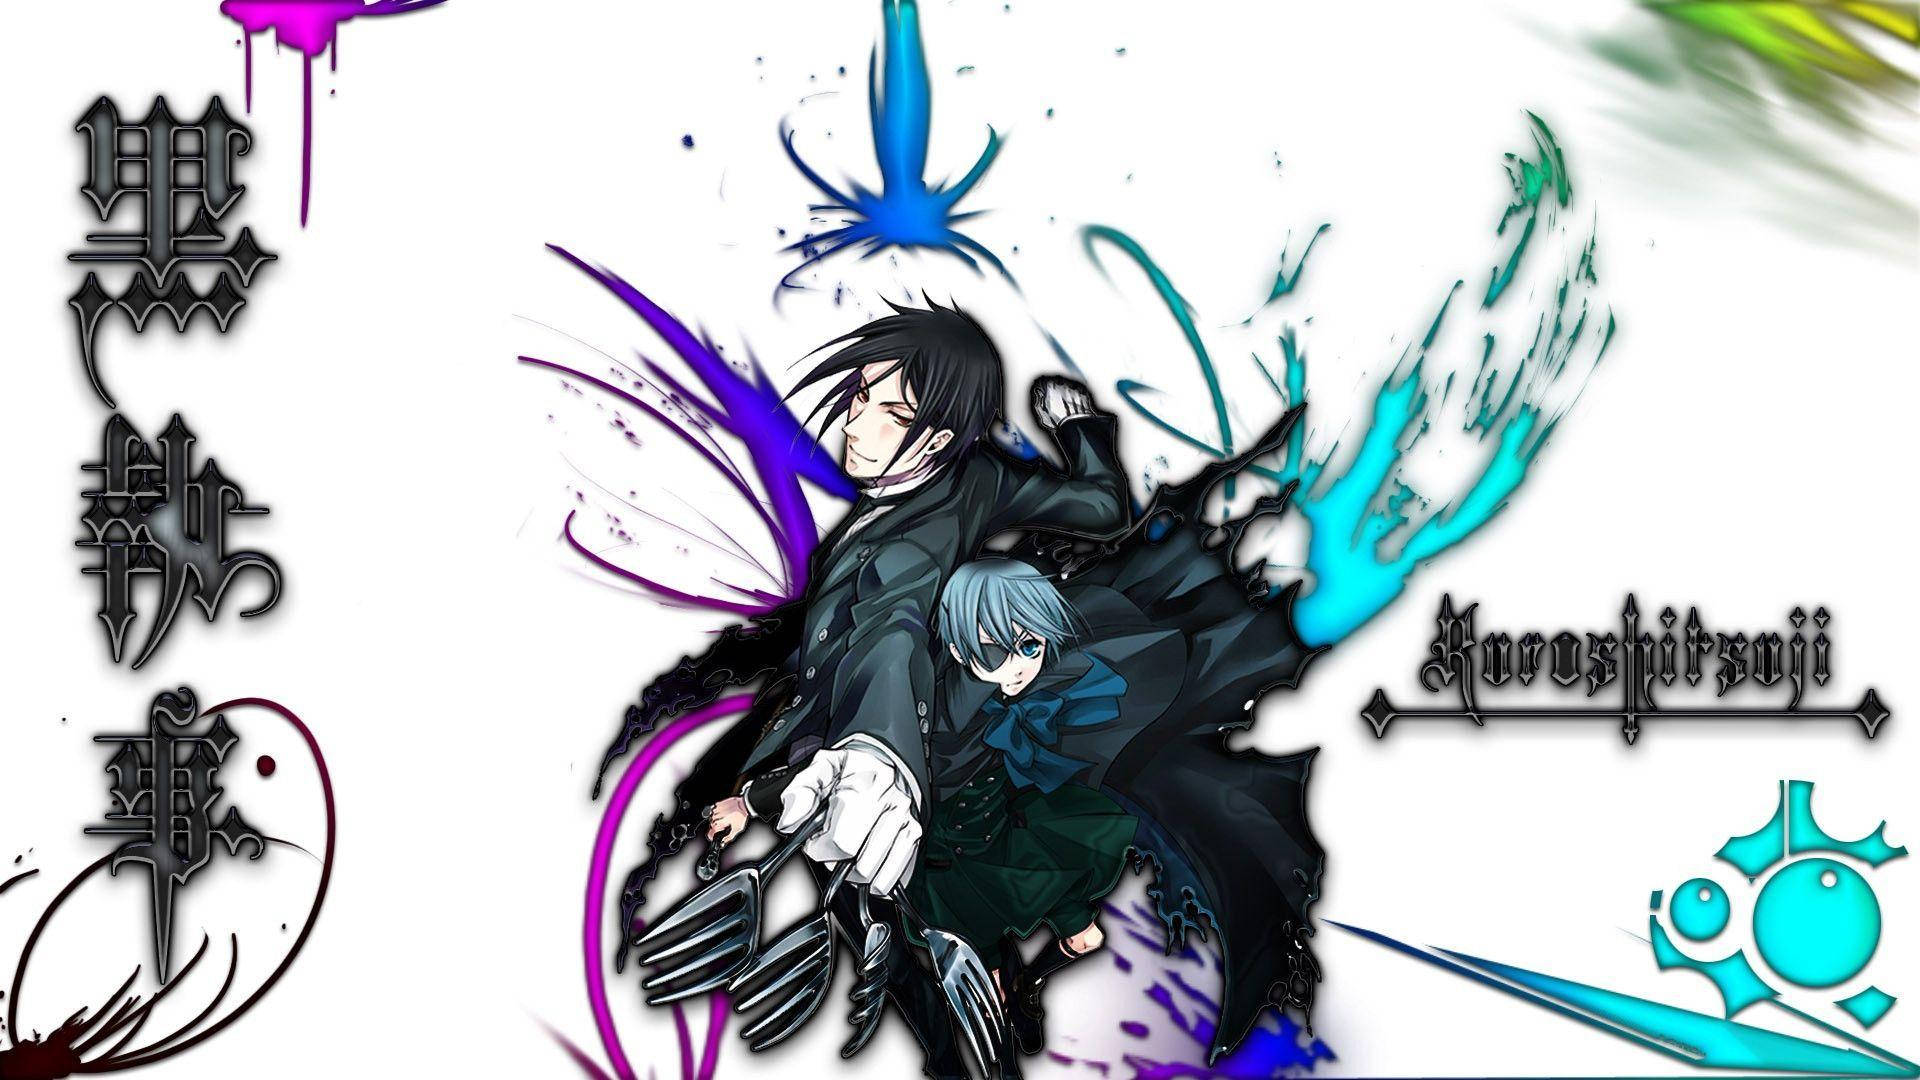 Black Butler 1920X1080 Wallpaper and Background Image